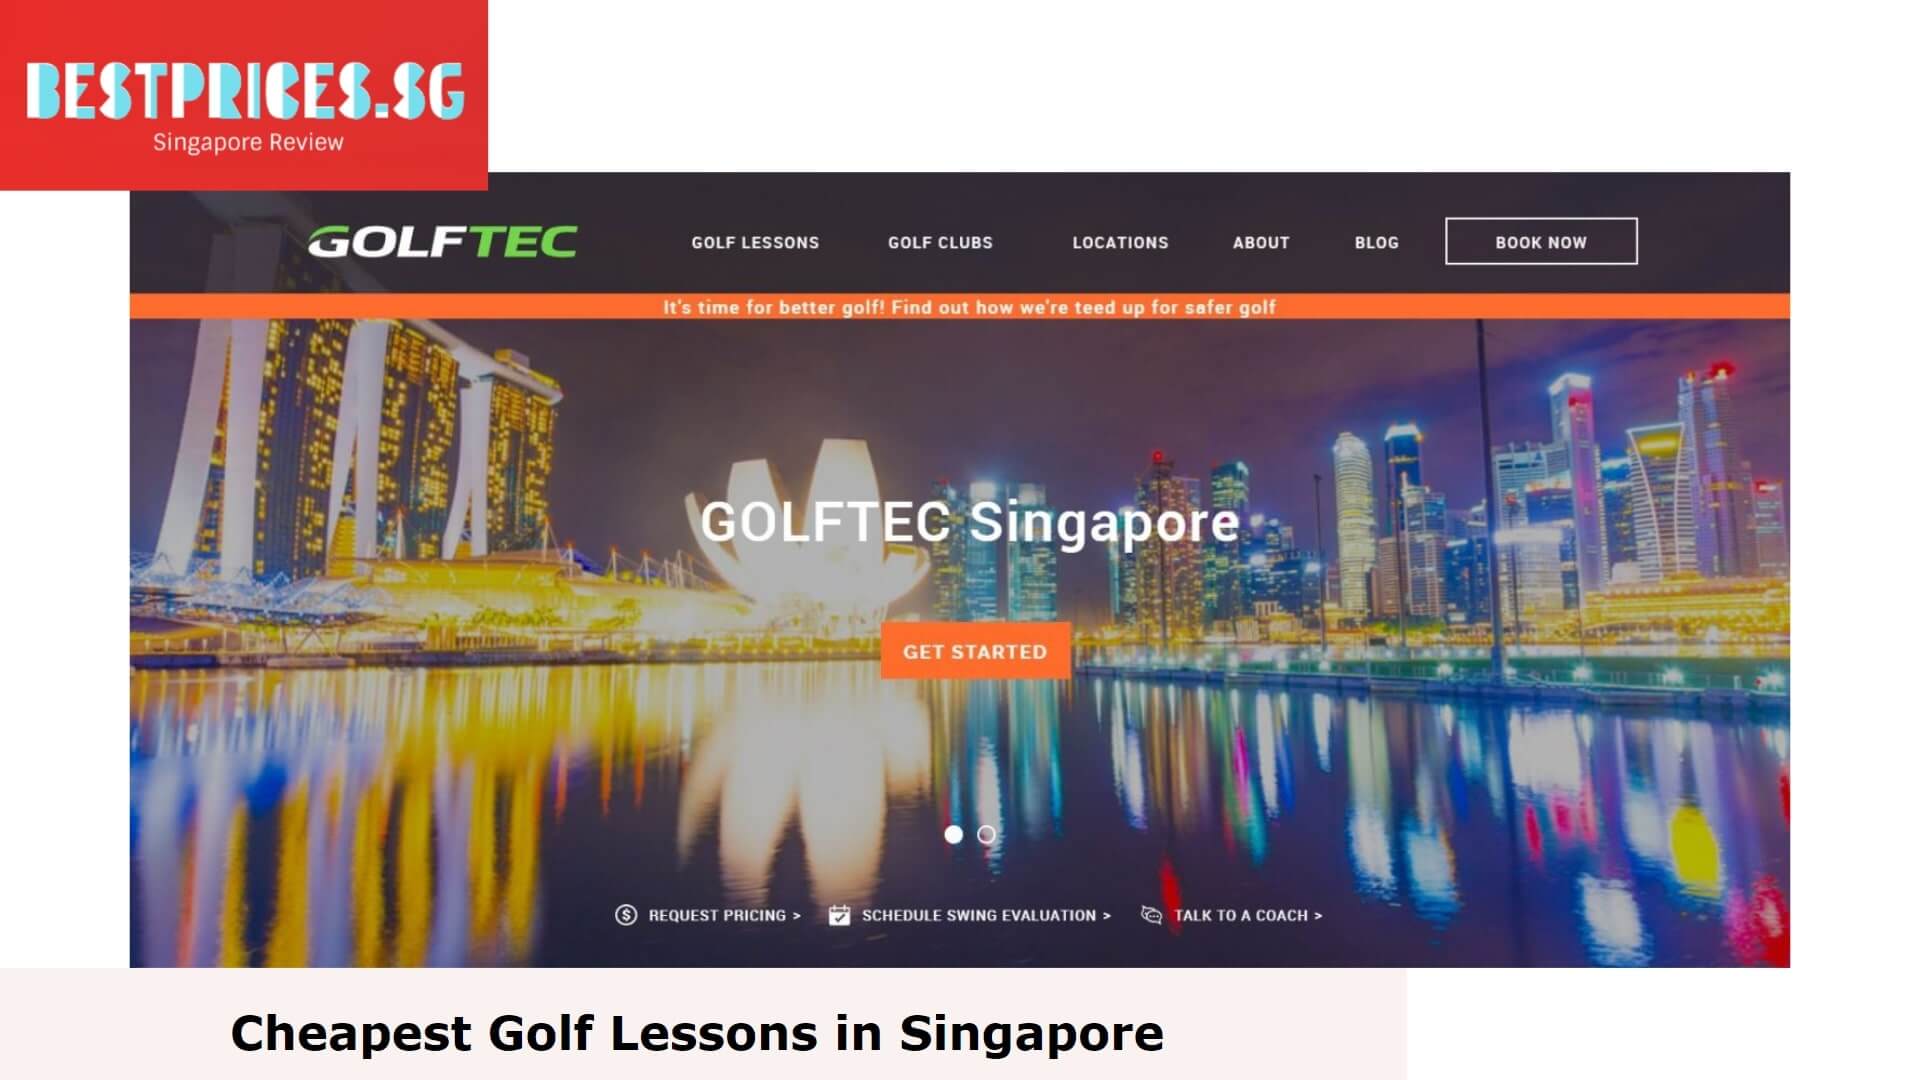 GolfTec - Cheapest Golf Lessons Singapore, cheap golf lessons singapore, cheap golf classes singapore, How much is a golf lesson in Singapore?, Where can I play golf cheap in Singapore?, How much should I spend on golf lessons?, How much is it to learn golf in Singapore?, golf lessons package, golf lessons in singapore, golf lessons singapore price, affordable golf lessons, best golf lessons in singapore, golf lessons singapore beginners, female golf coach singapore, bukit batok golf lessons, 